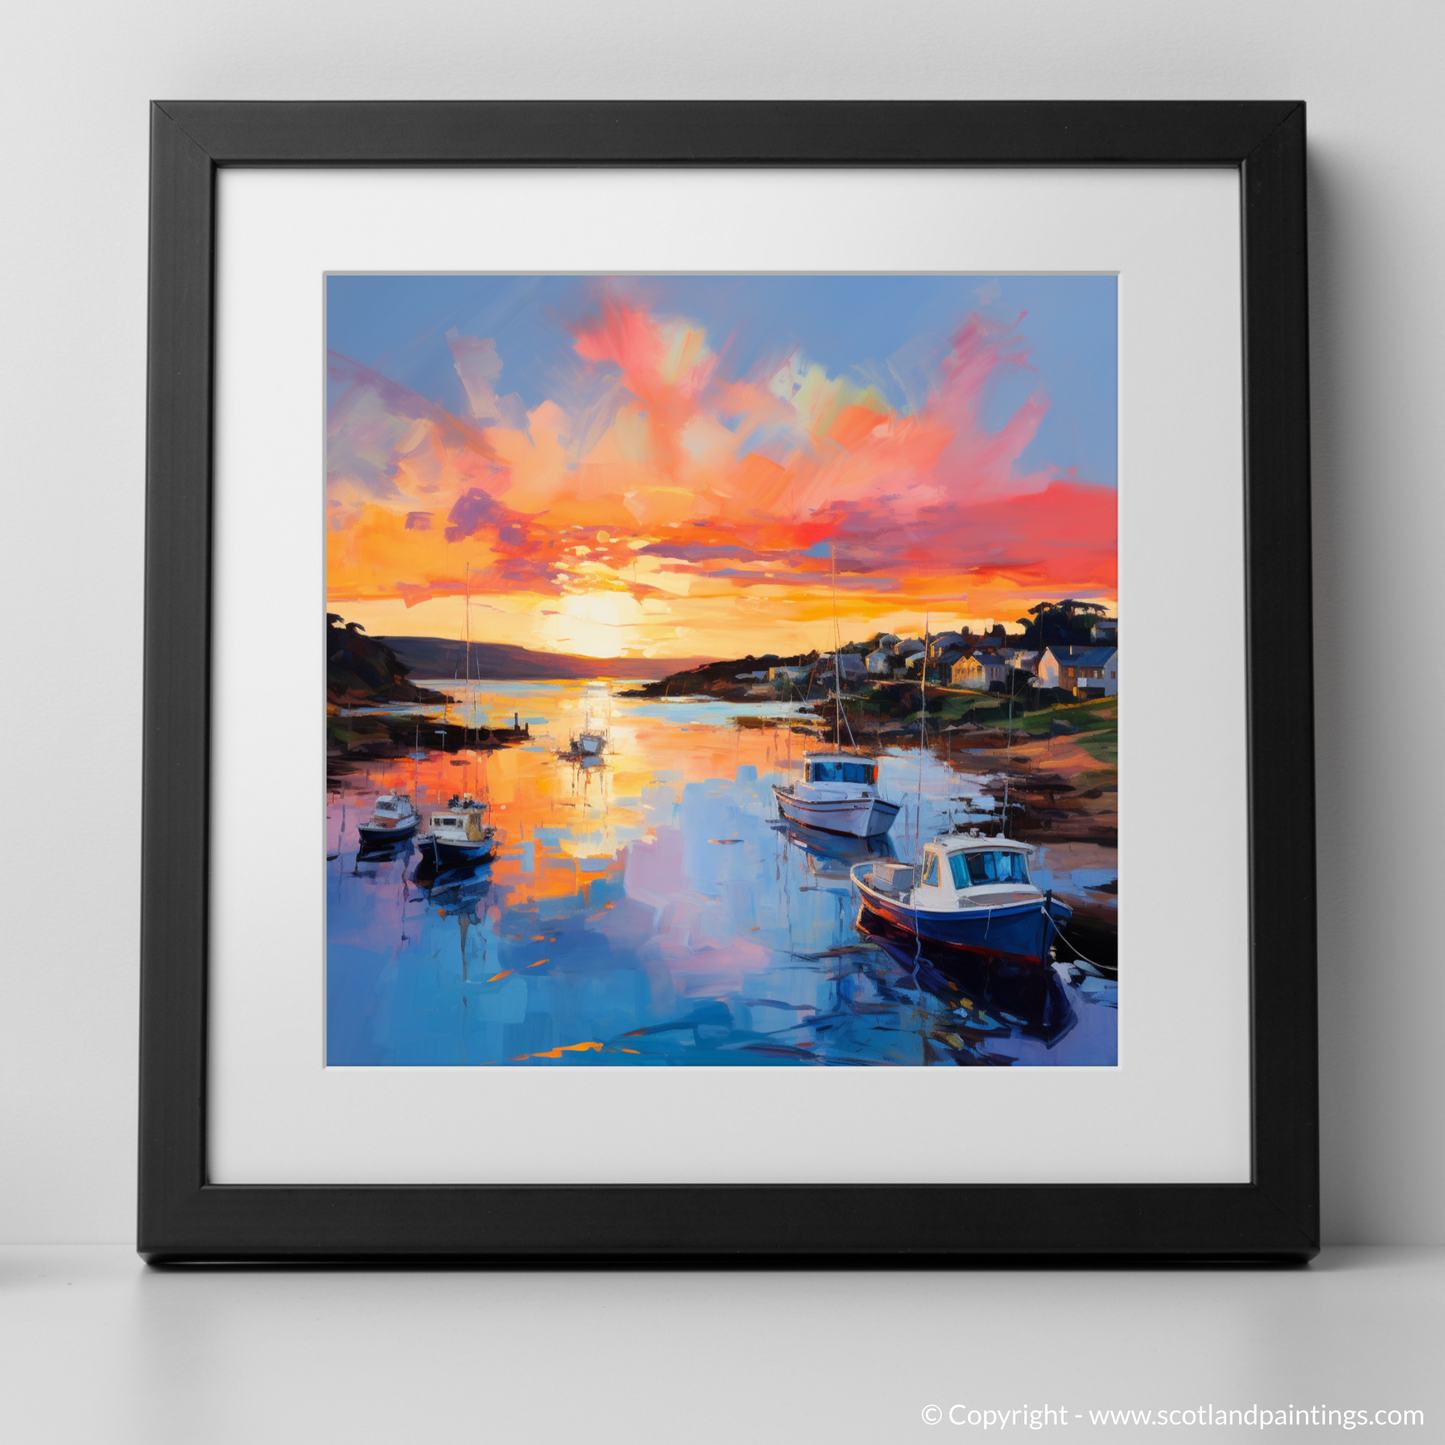 Painting and Art Print of Cullen Harbour at sunset. Sunset Serenity at Cullen Harbour.